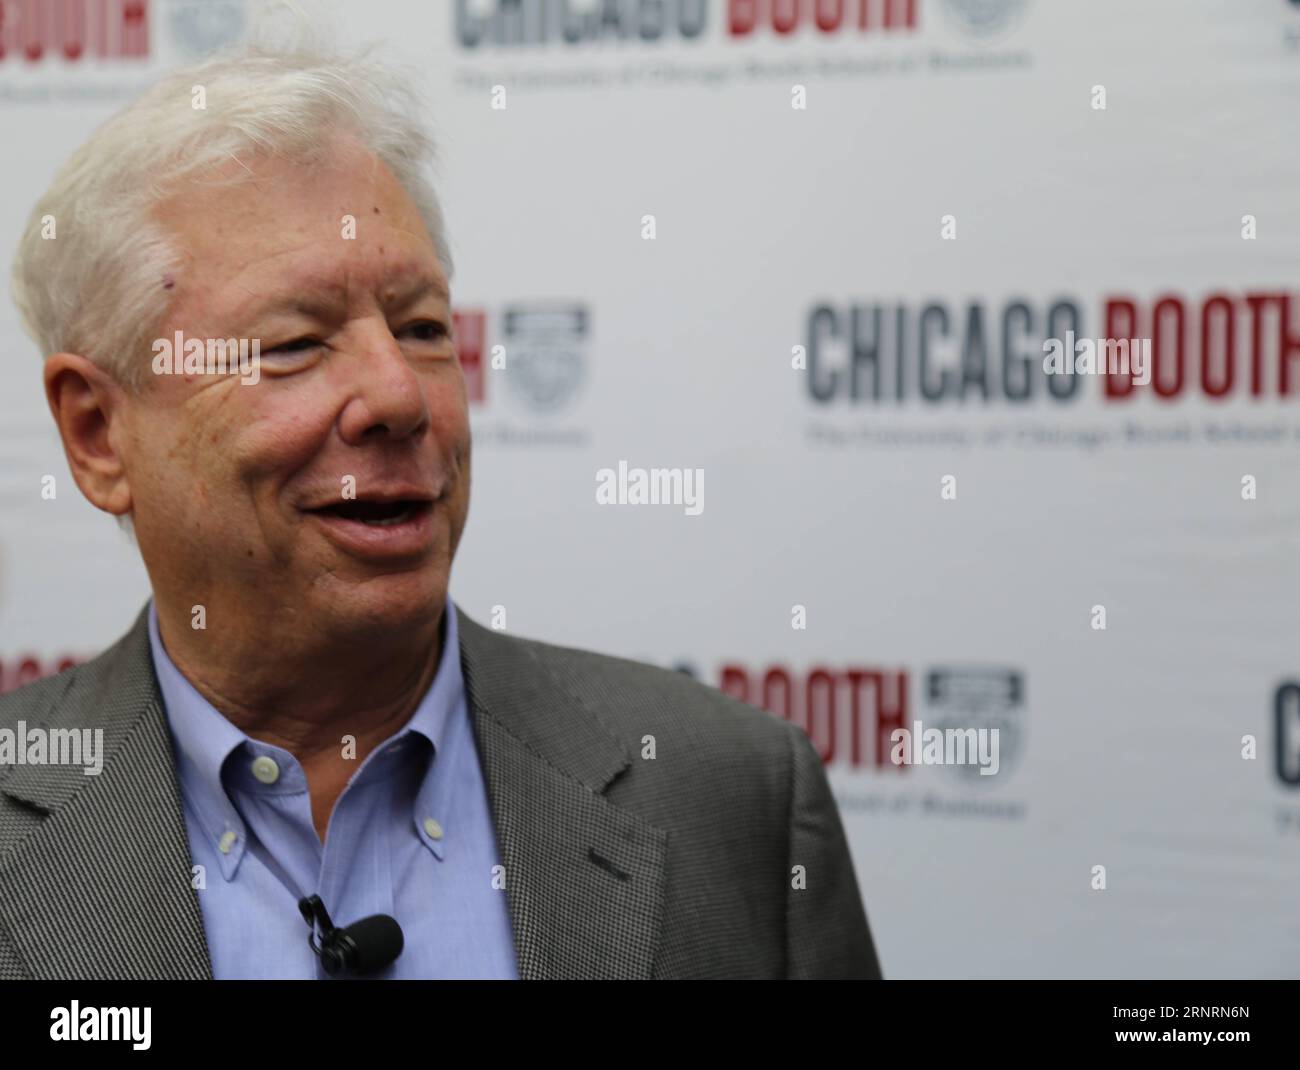 (171009) -- CHICAGO, Oct. 9, 2017 -- Richard H. Thaler, 2017 Nobel Prize winner in Economics, attends a press conference at University of Chicago Booth School of Business in Chicago, the United States, on Oct. 9, 2017. The 2017 Nobel Prize in Economics was awarded to Richard H. Thaler for his contributions to behavioural economics, announced the Royal Swedish Academy of Sciences on Monday. ) U.S.-CHICAGO-NOBEL PRIZE IN ECONOMICS-RICHARD H. THALER-PRESS CONFERENCE WangxQiang PUBLICATIONxNOTxINxCHN Stock Photo